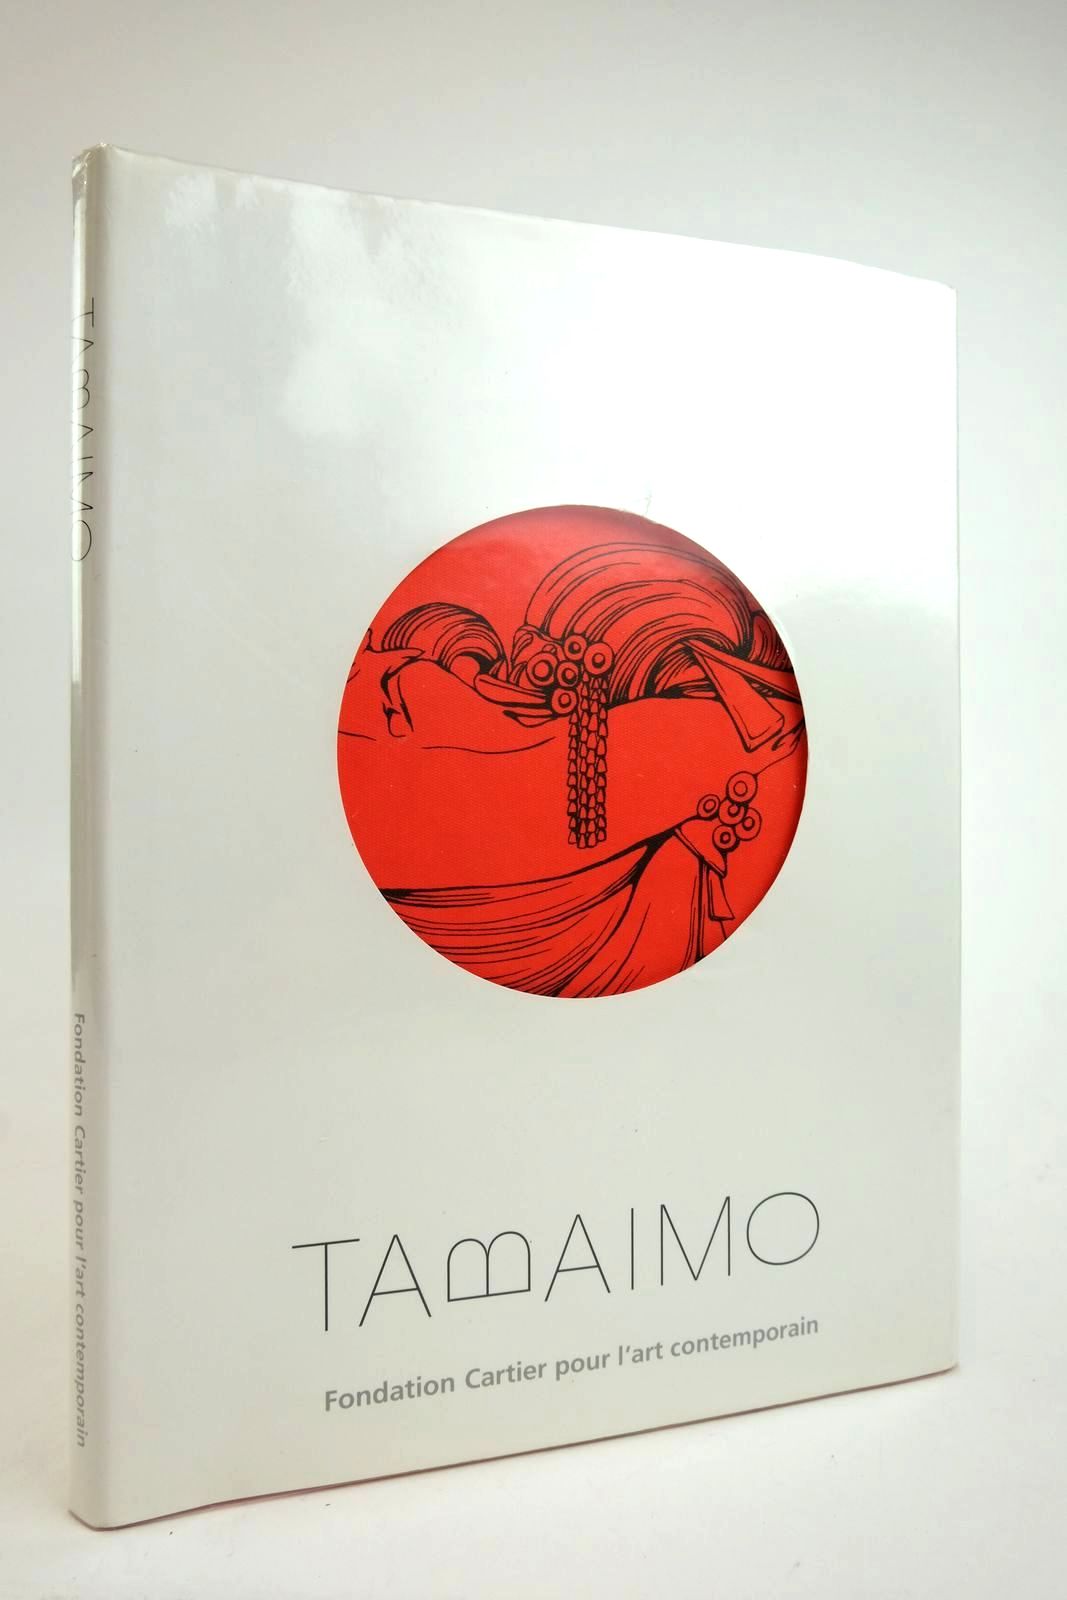 Photo of TABAIMO illustrated by Tabaimo, published by Fondation Cartier Pour L'Art Contemporain (STOCK CODE: 2135901)  for sale by Stella & Rose's Books